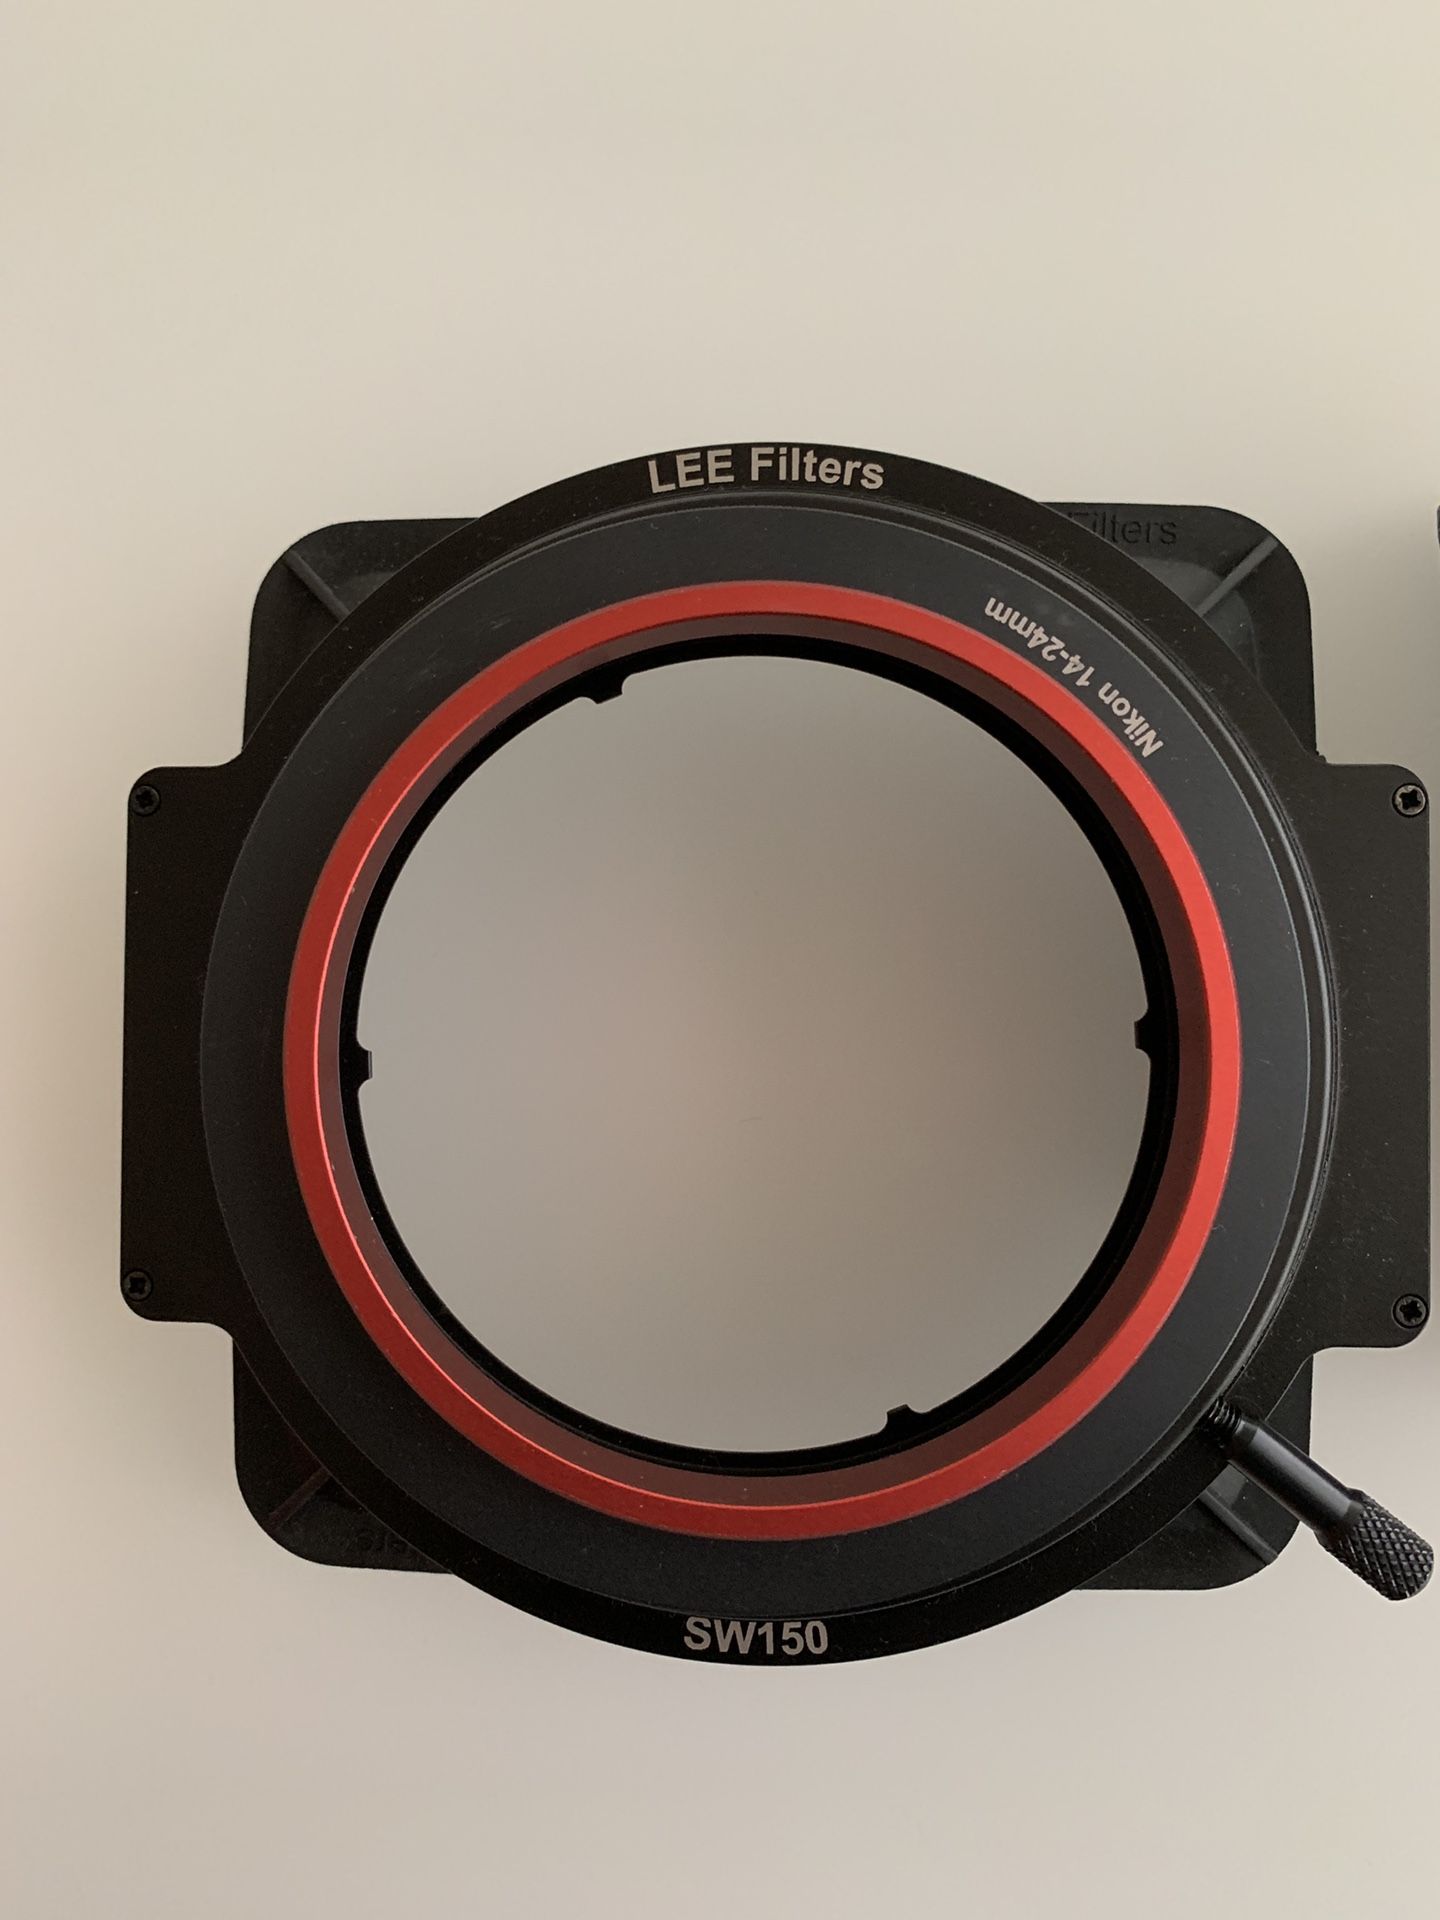 Lee Filters SW150 Mark II filter holder and 14-24 mm adaptor